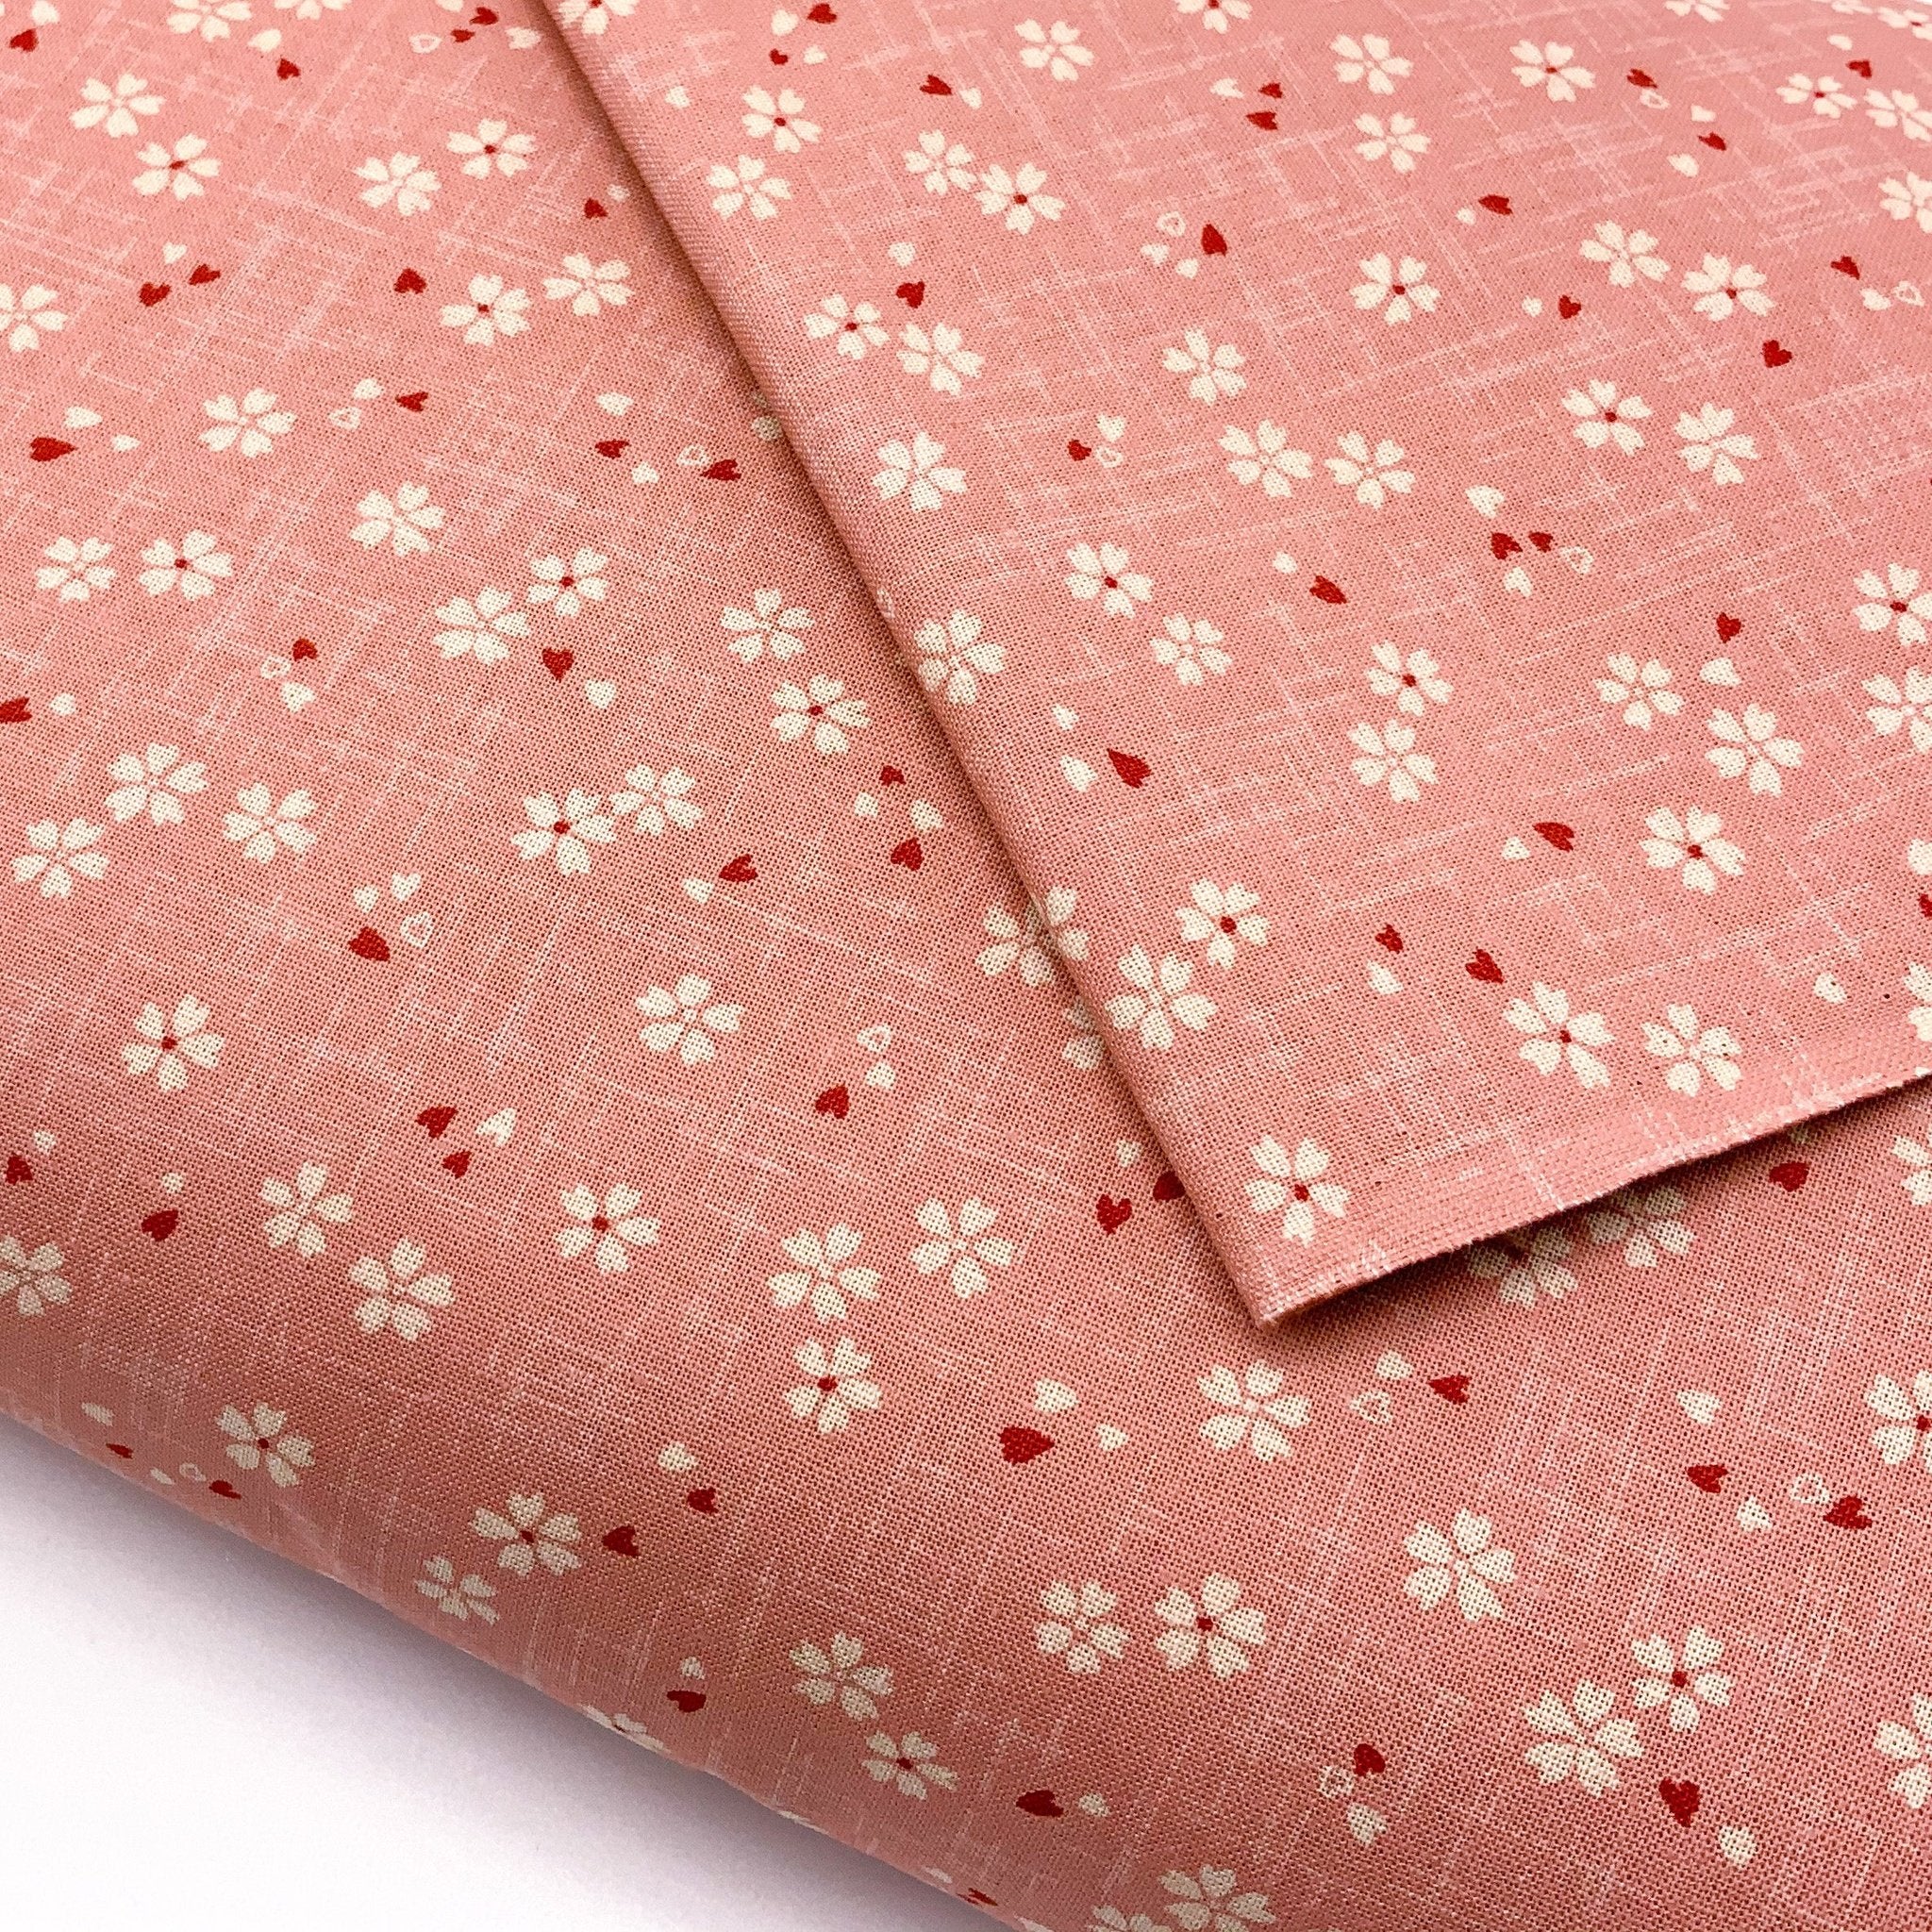 Japanese Cotton Sheeting Print - Cherry Blossom with Falling Petals Pink